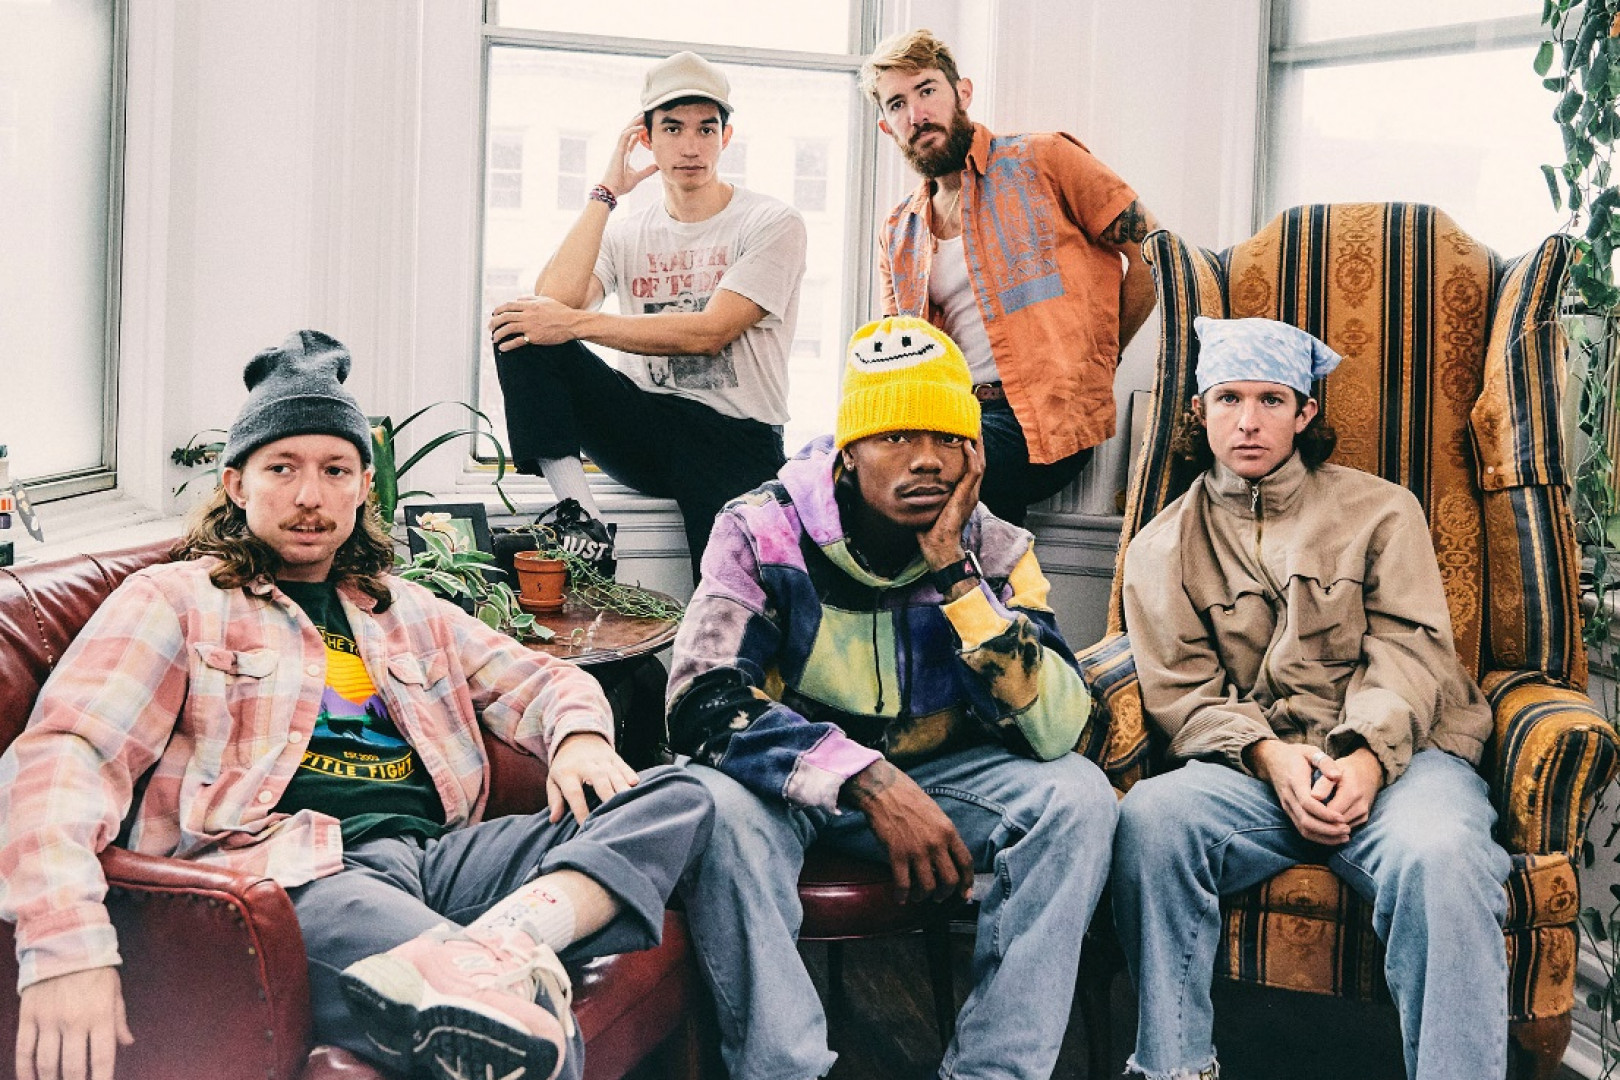 Turnstile announce US & CAN tour dates, release "New Heart Design" video